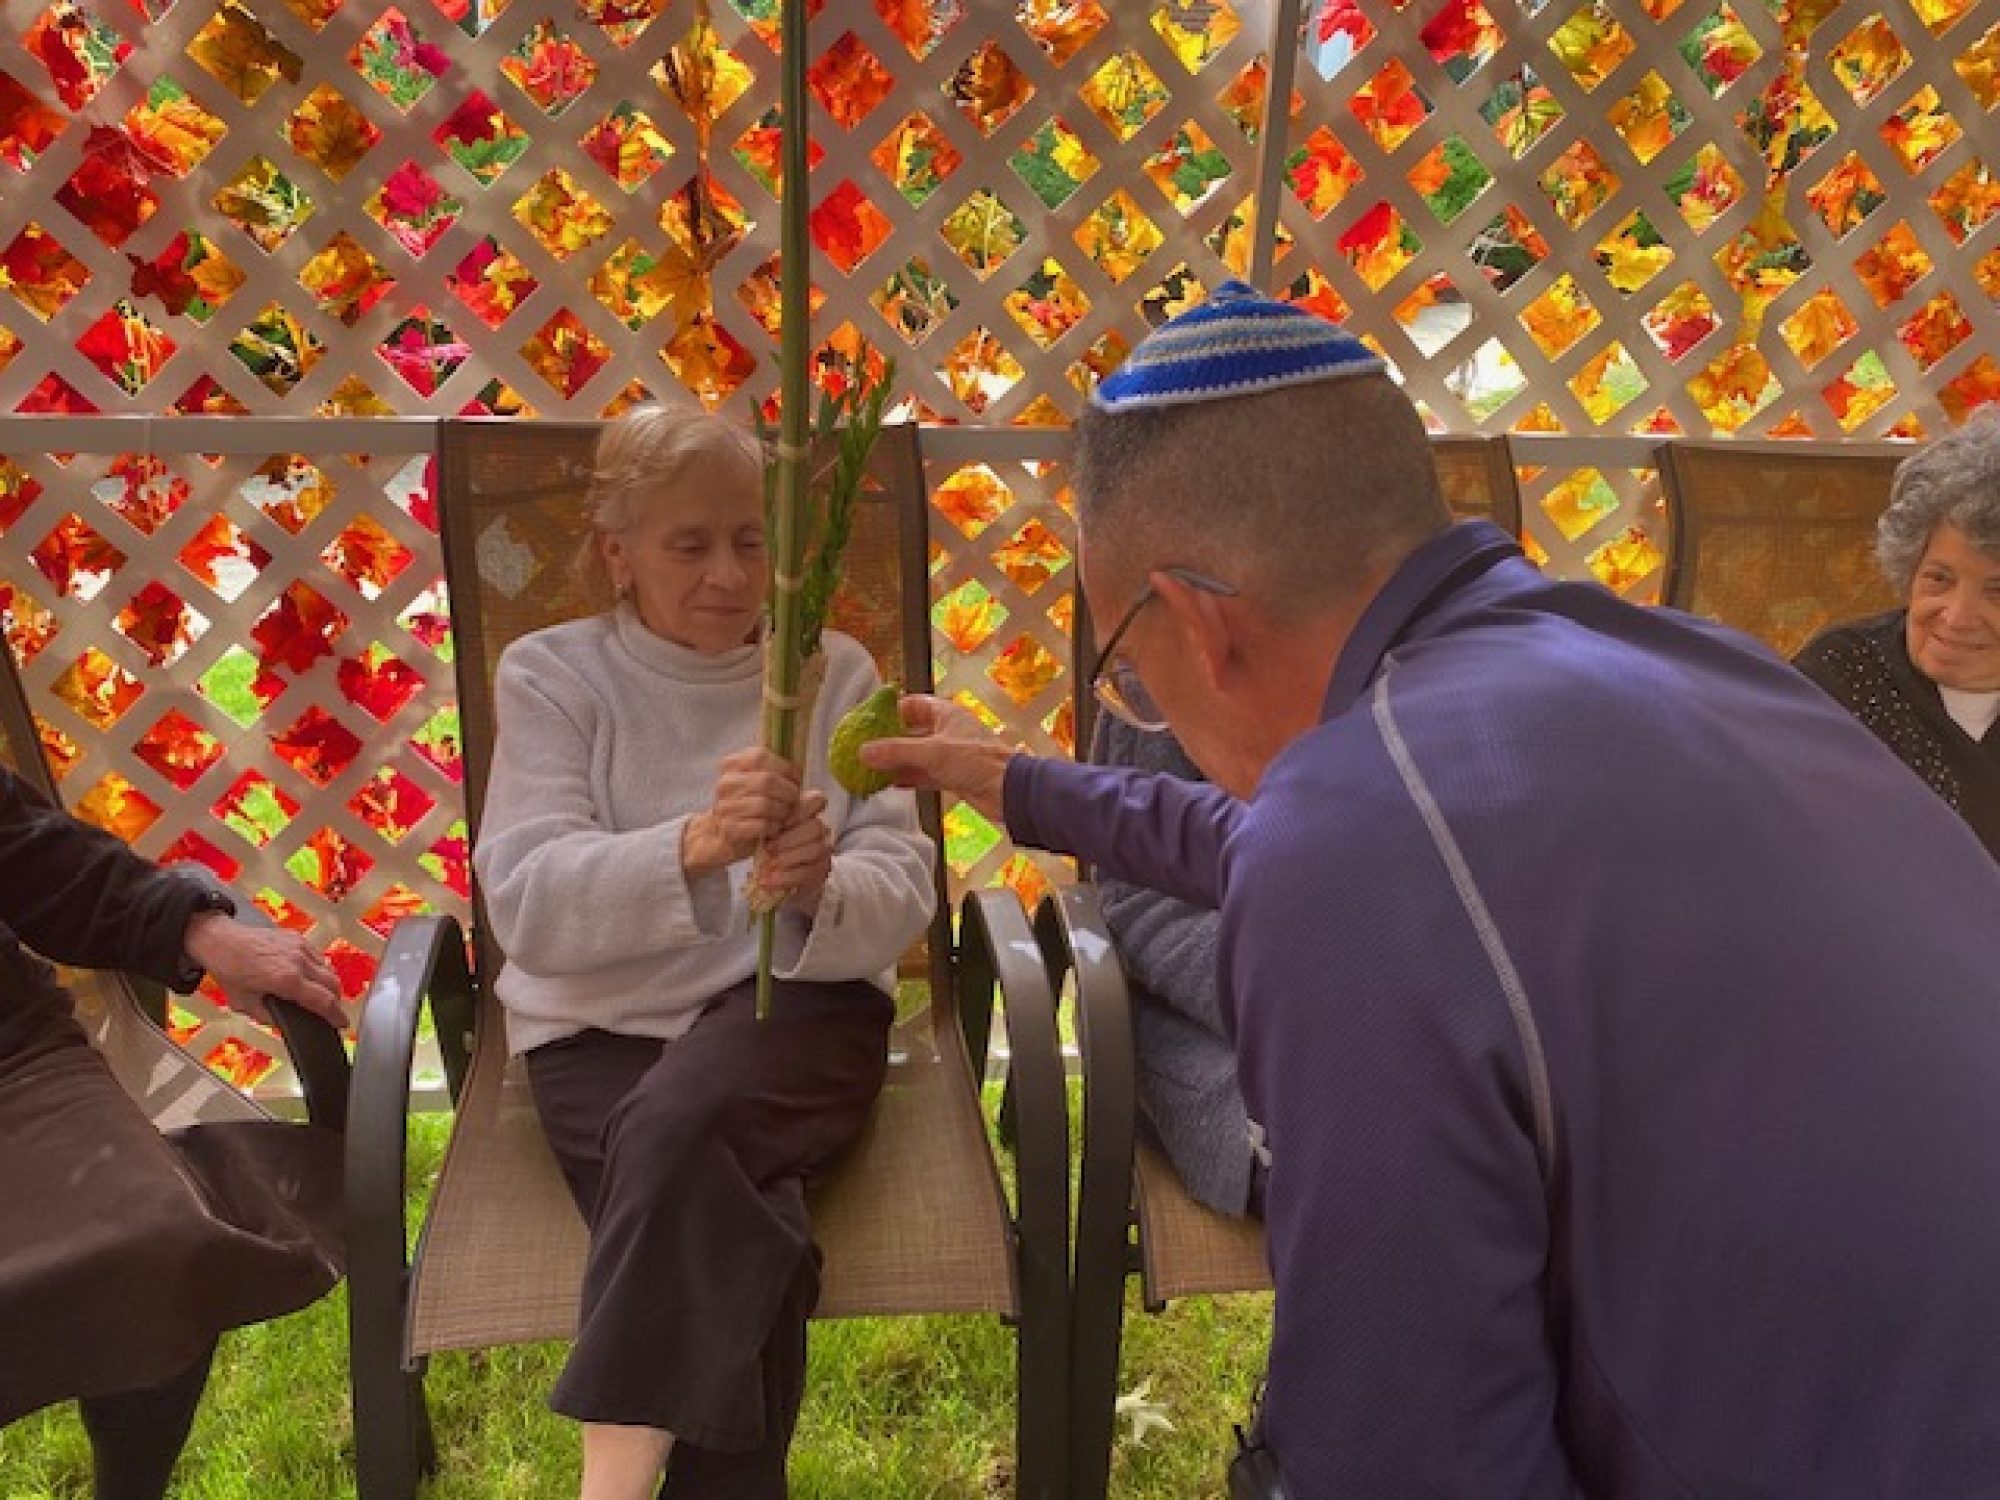 A resident in the Sukkah